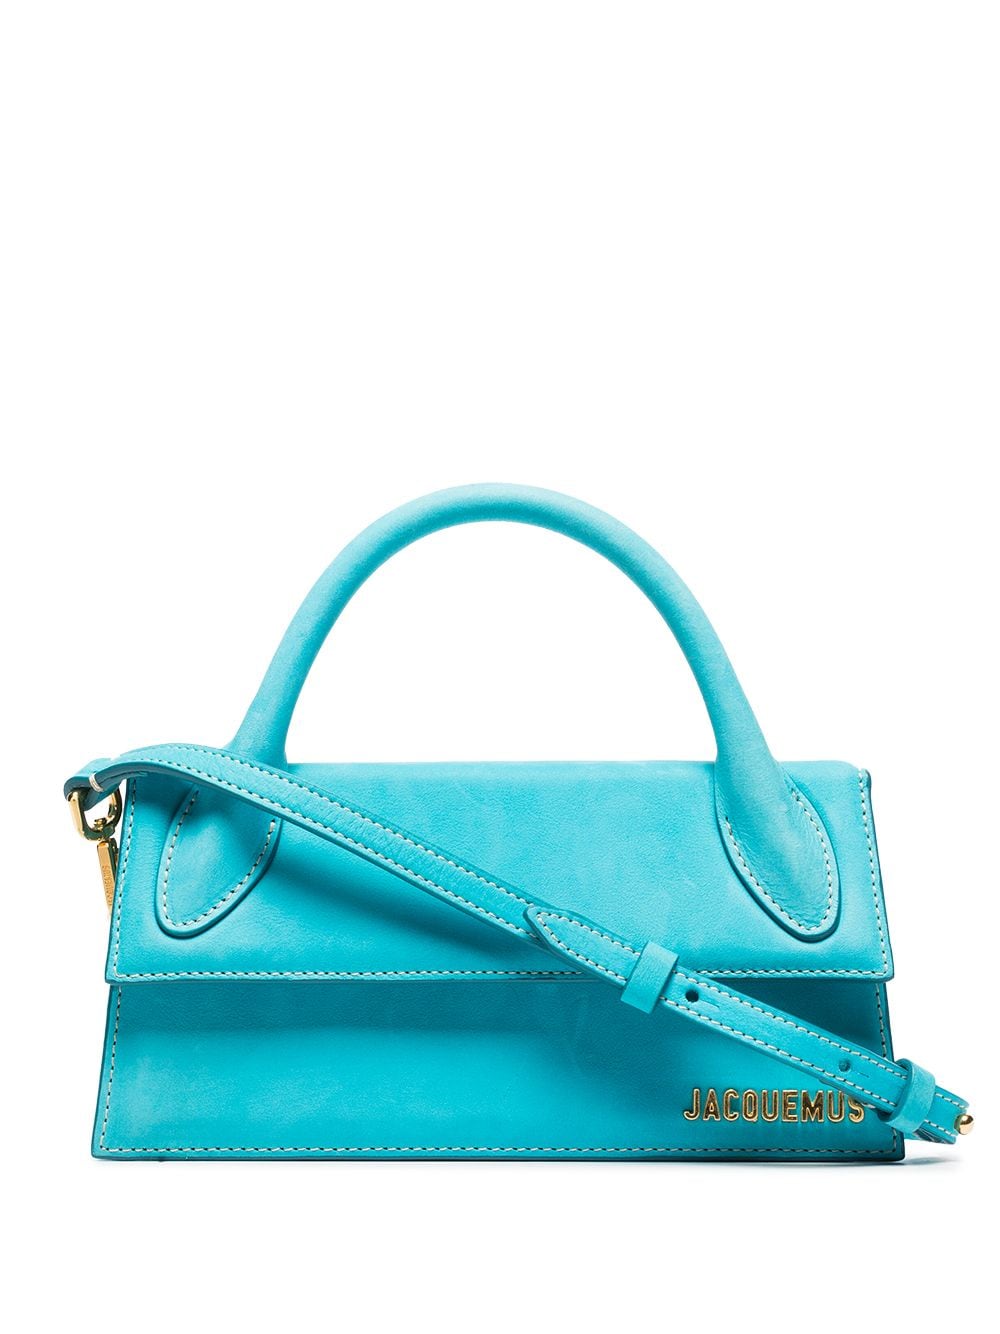 Jacquemus Le Chiquito Long Leather Tote In Blue